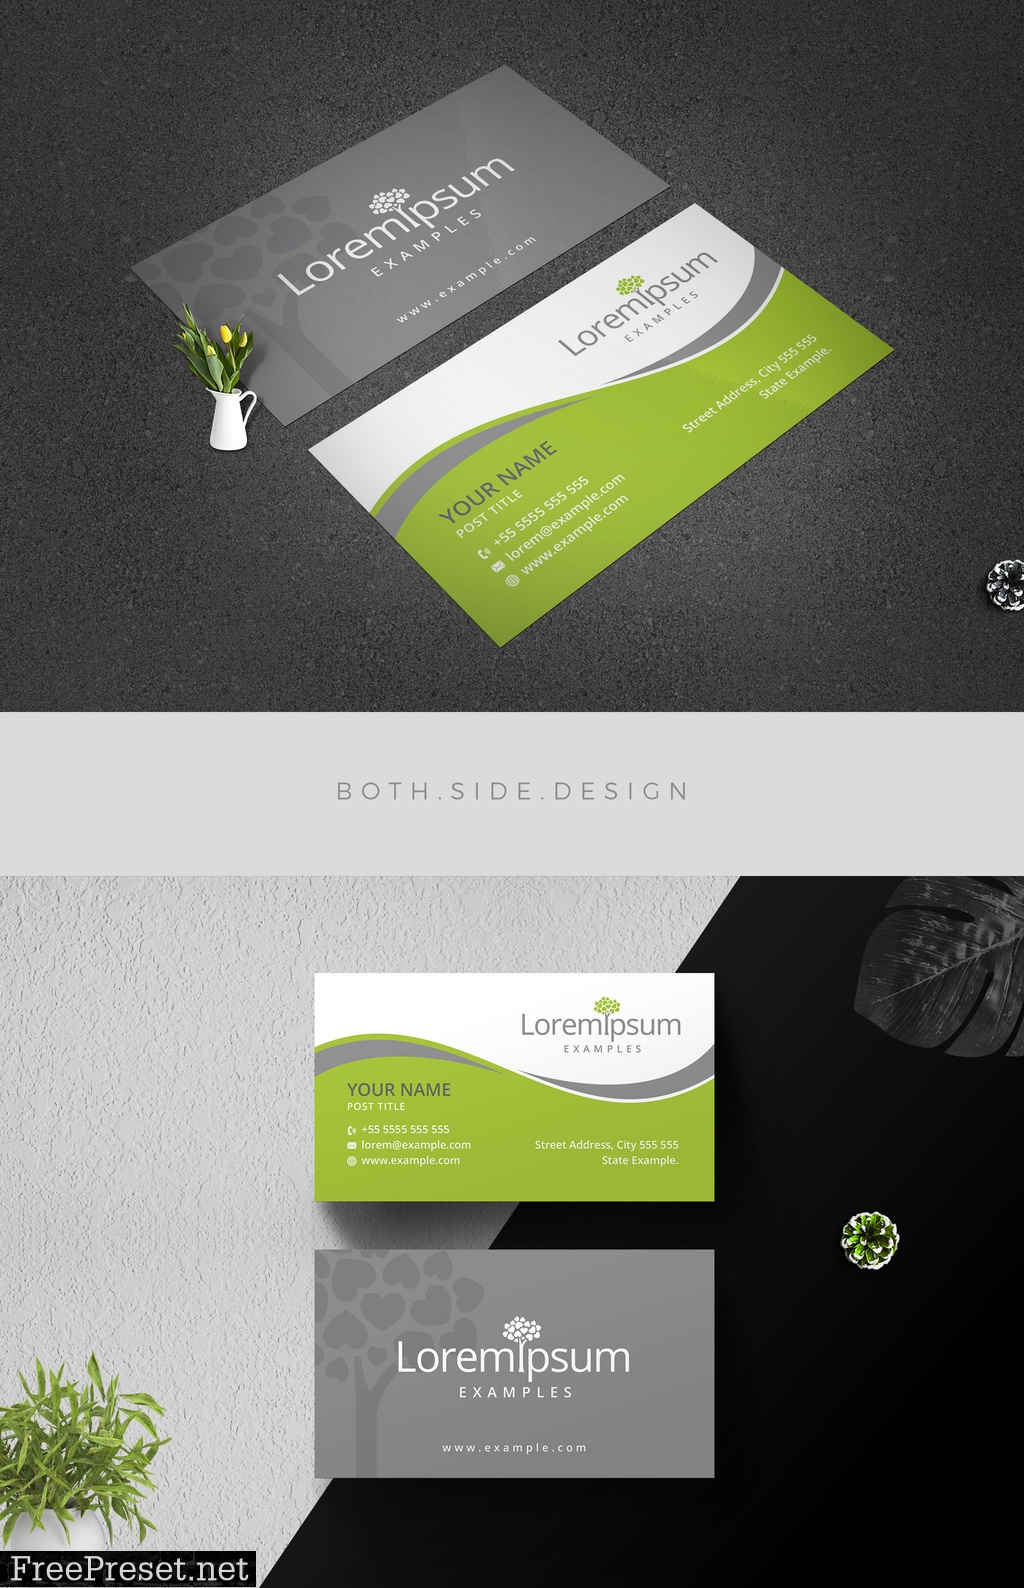 Business Card Layout with Heart-Shaped Leaves Tree 204275698